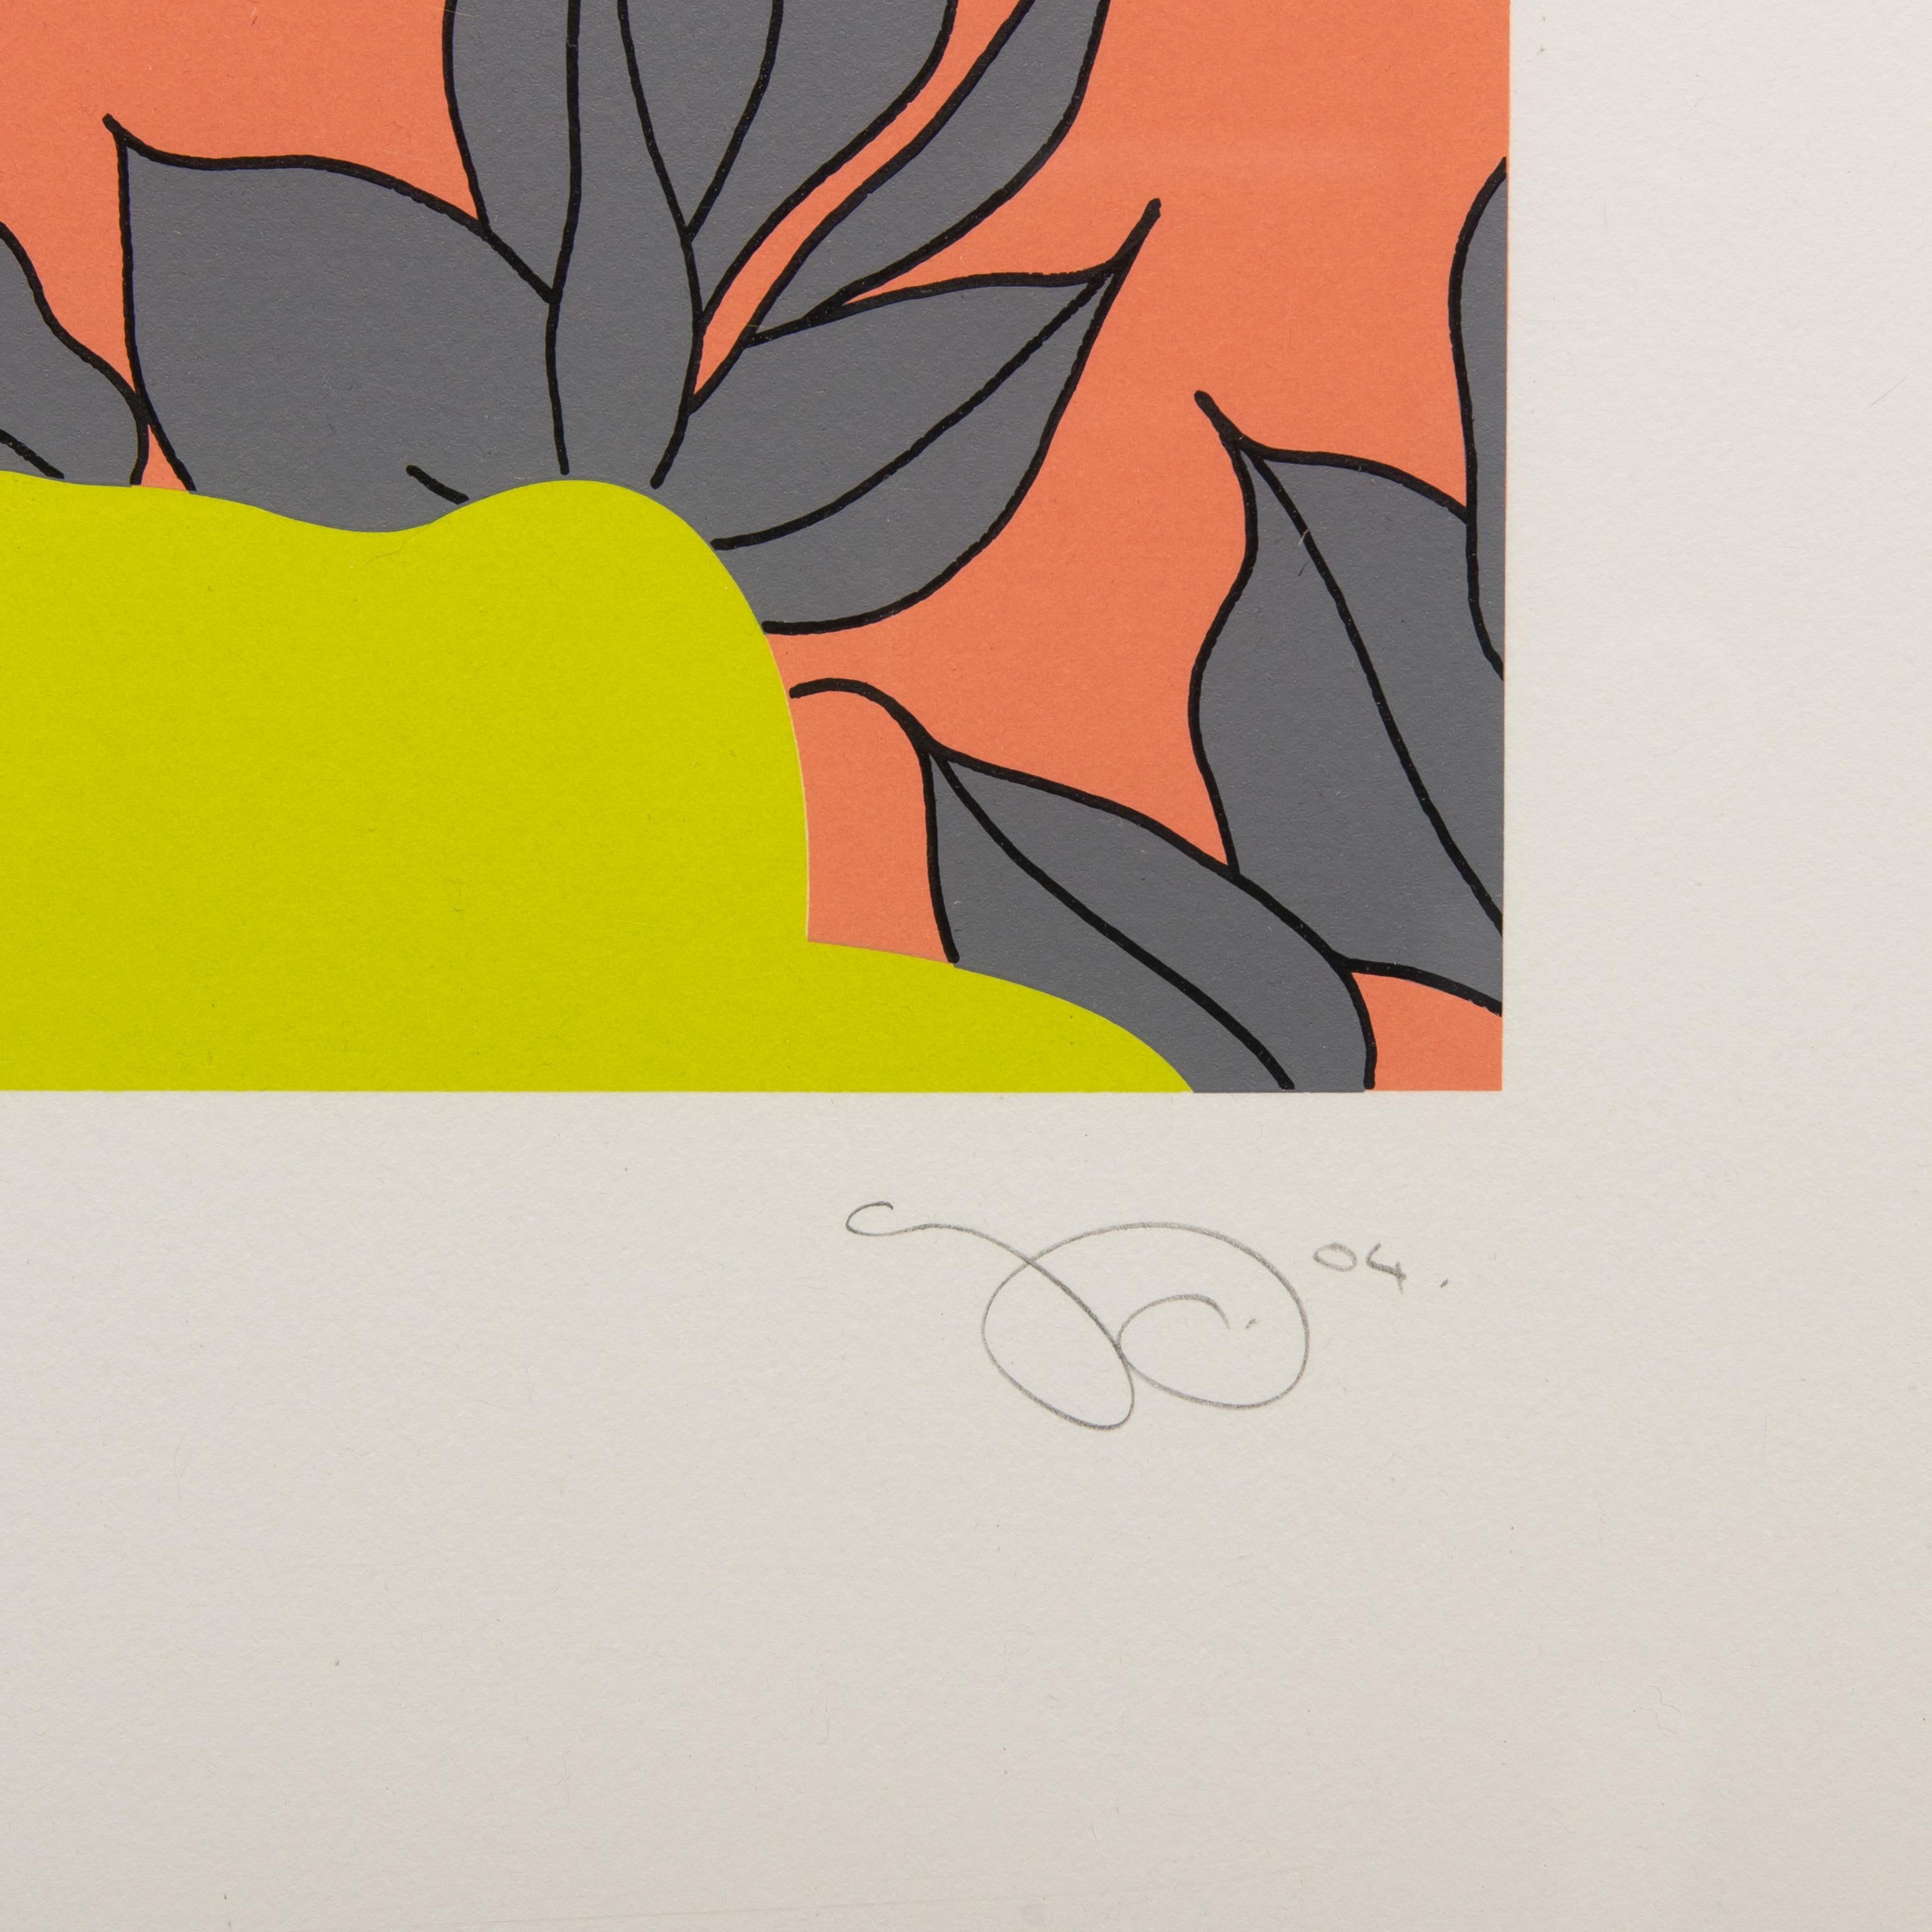 2750Grey Leaves, 2004
Screenprint in four colours with one glaze, printed on 400gsm Somerset Tub paper
Signed by the artist in pencil, lower right on recto
71.1 x 58.4 cm 
28 x 23 in
Edition of 250

Gary Hume, a contemporary British artist